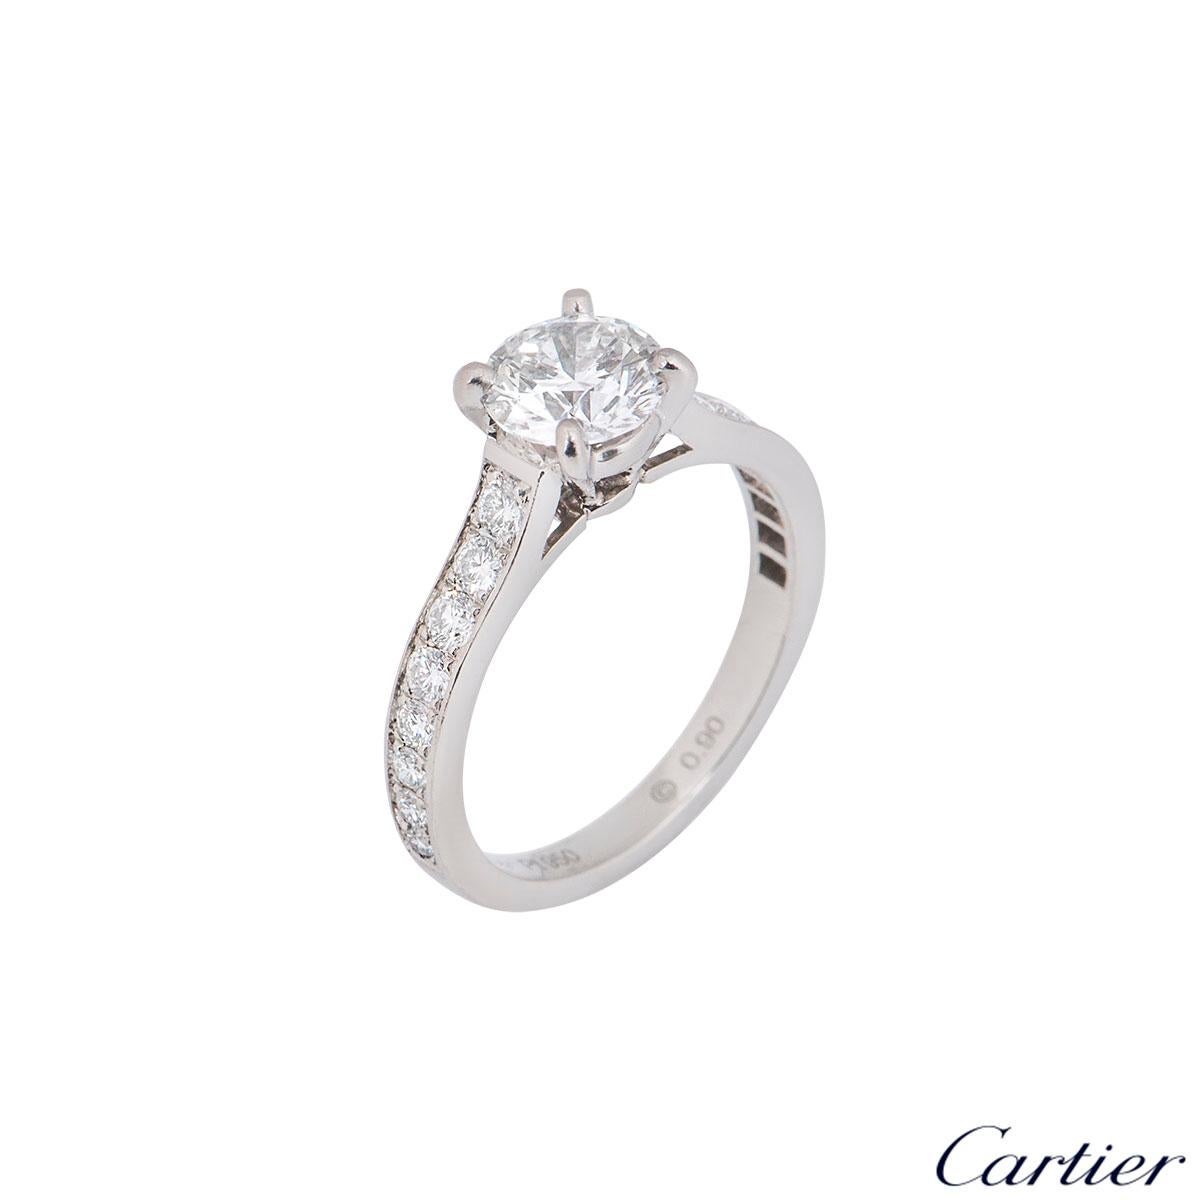 A stunning platinum Cartier diamond engagement ring from the 1895 solitaire collection. The ring comprises of a round brilliant cut diamond in a four claw setting with a weight of 0.90ct, E colour and VS2 clarity with 16 round brilliant cut diamonds